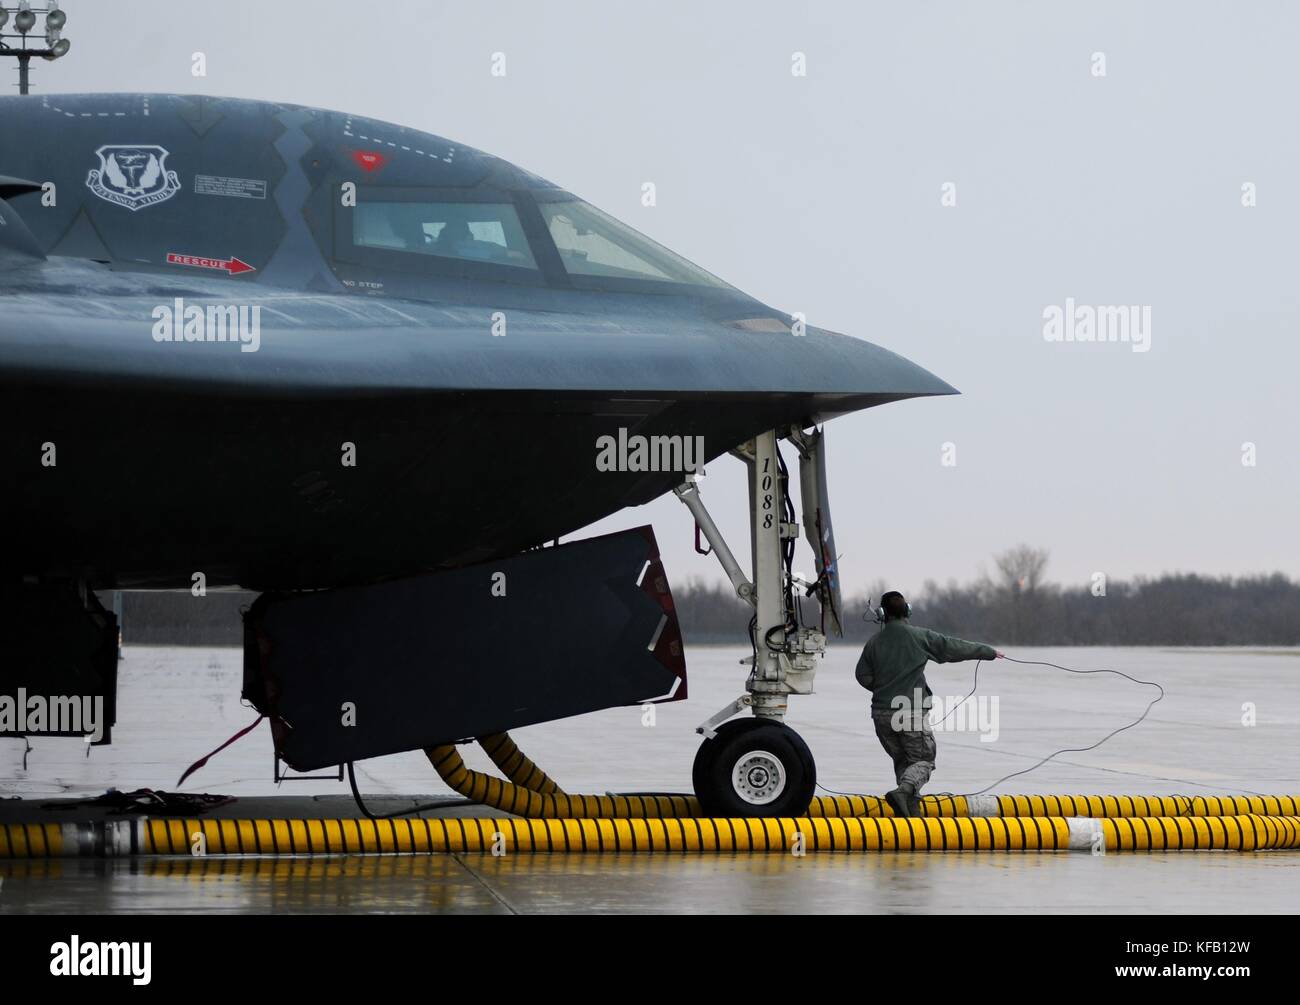 U.S. Air Force pilots prepare a U.S. Air Force B-2 Spirit stealth strategic bomber aircraft for Operation Odyssey Dawn at the Whiteman Air Force Base March 19, 2011 near Knob Noster, Missouri.   (photo by Kenny Holston via Planetpix) Stock Photo